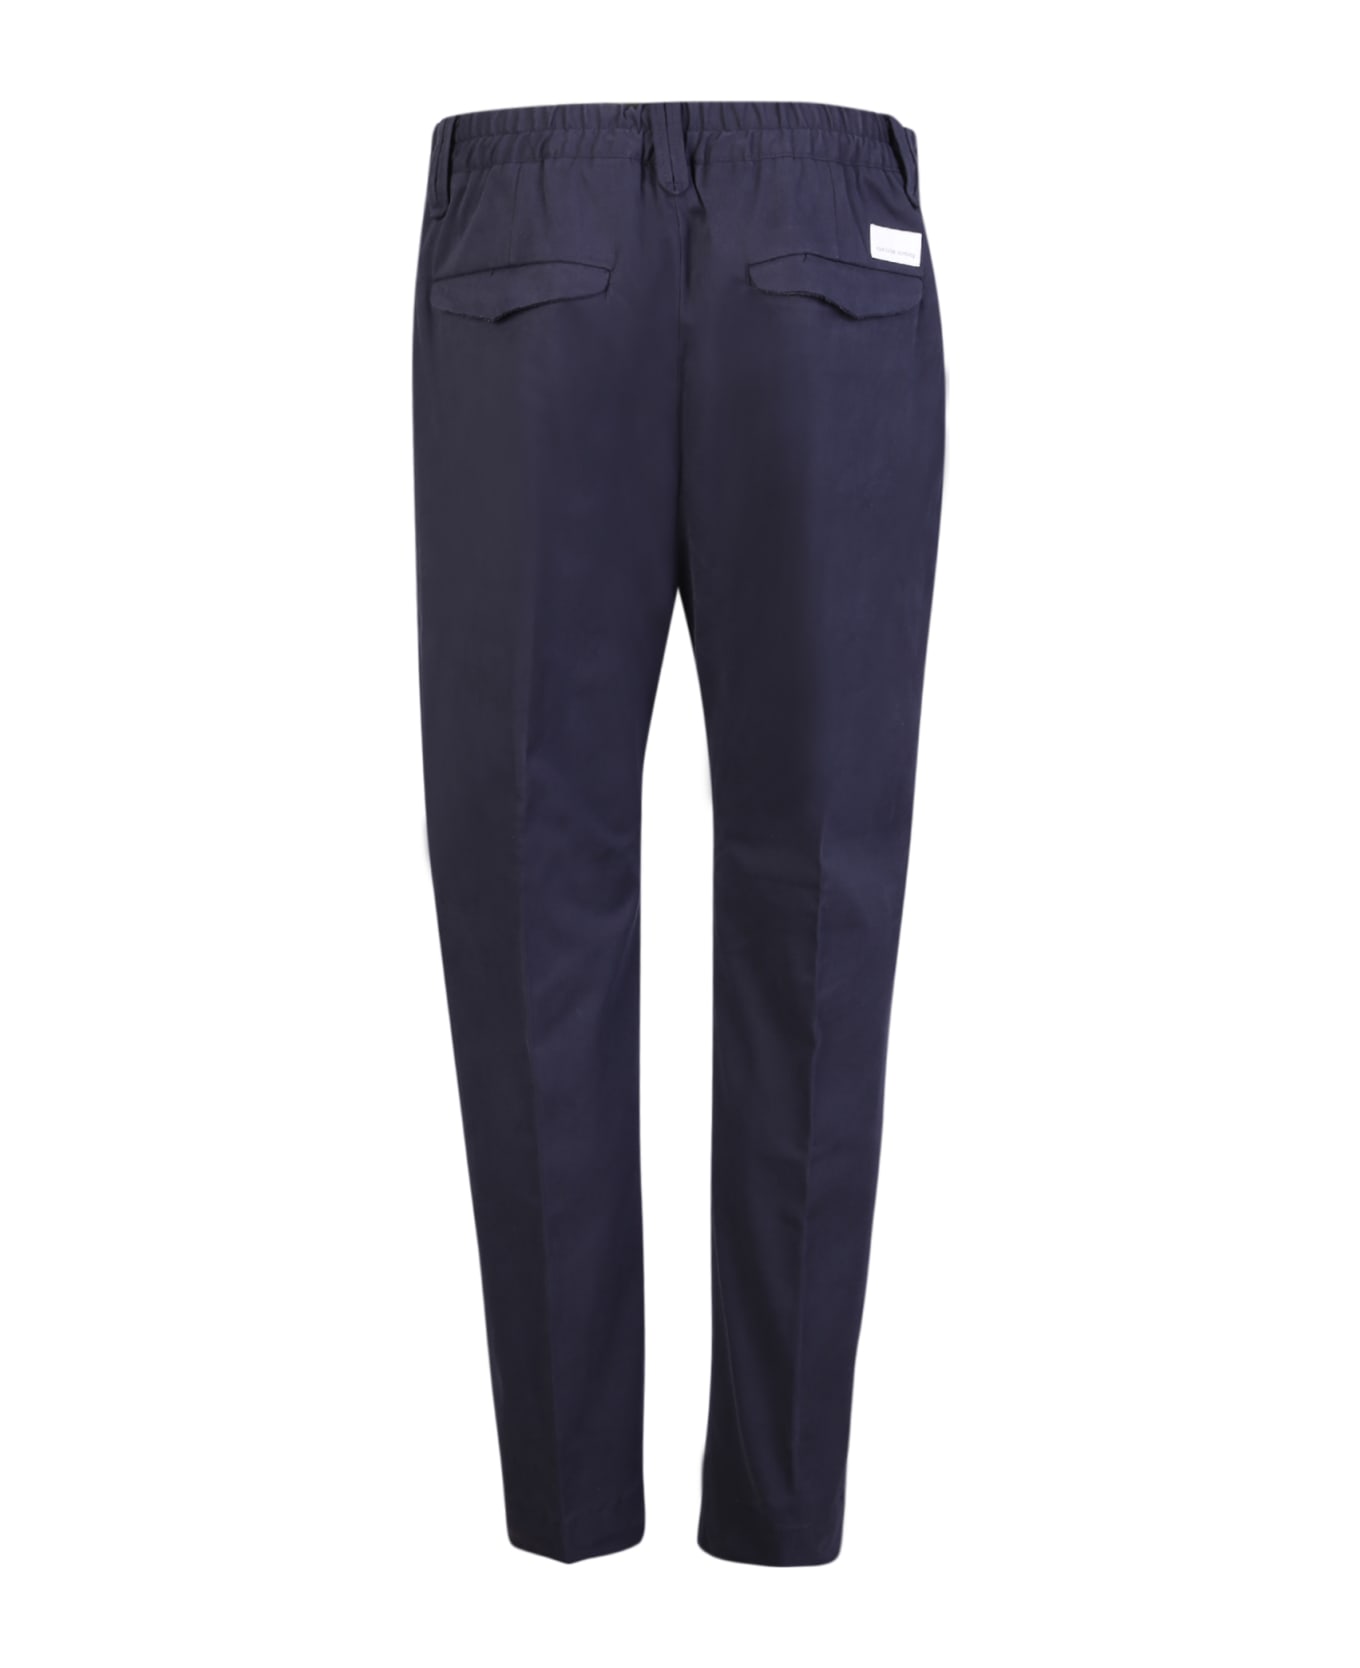 Nine in the Morning Blue Yoga Trousers - Blue ボトムス